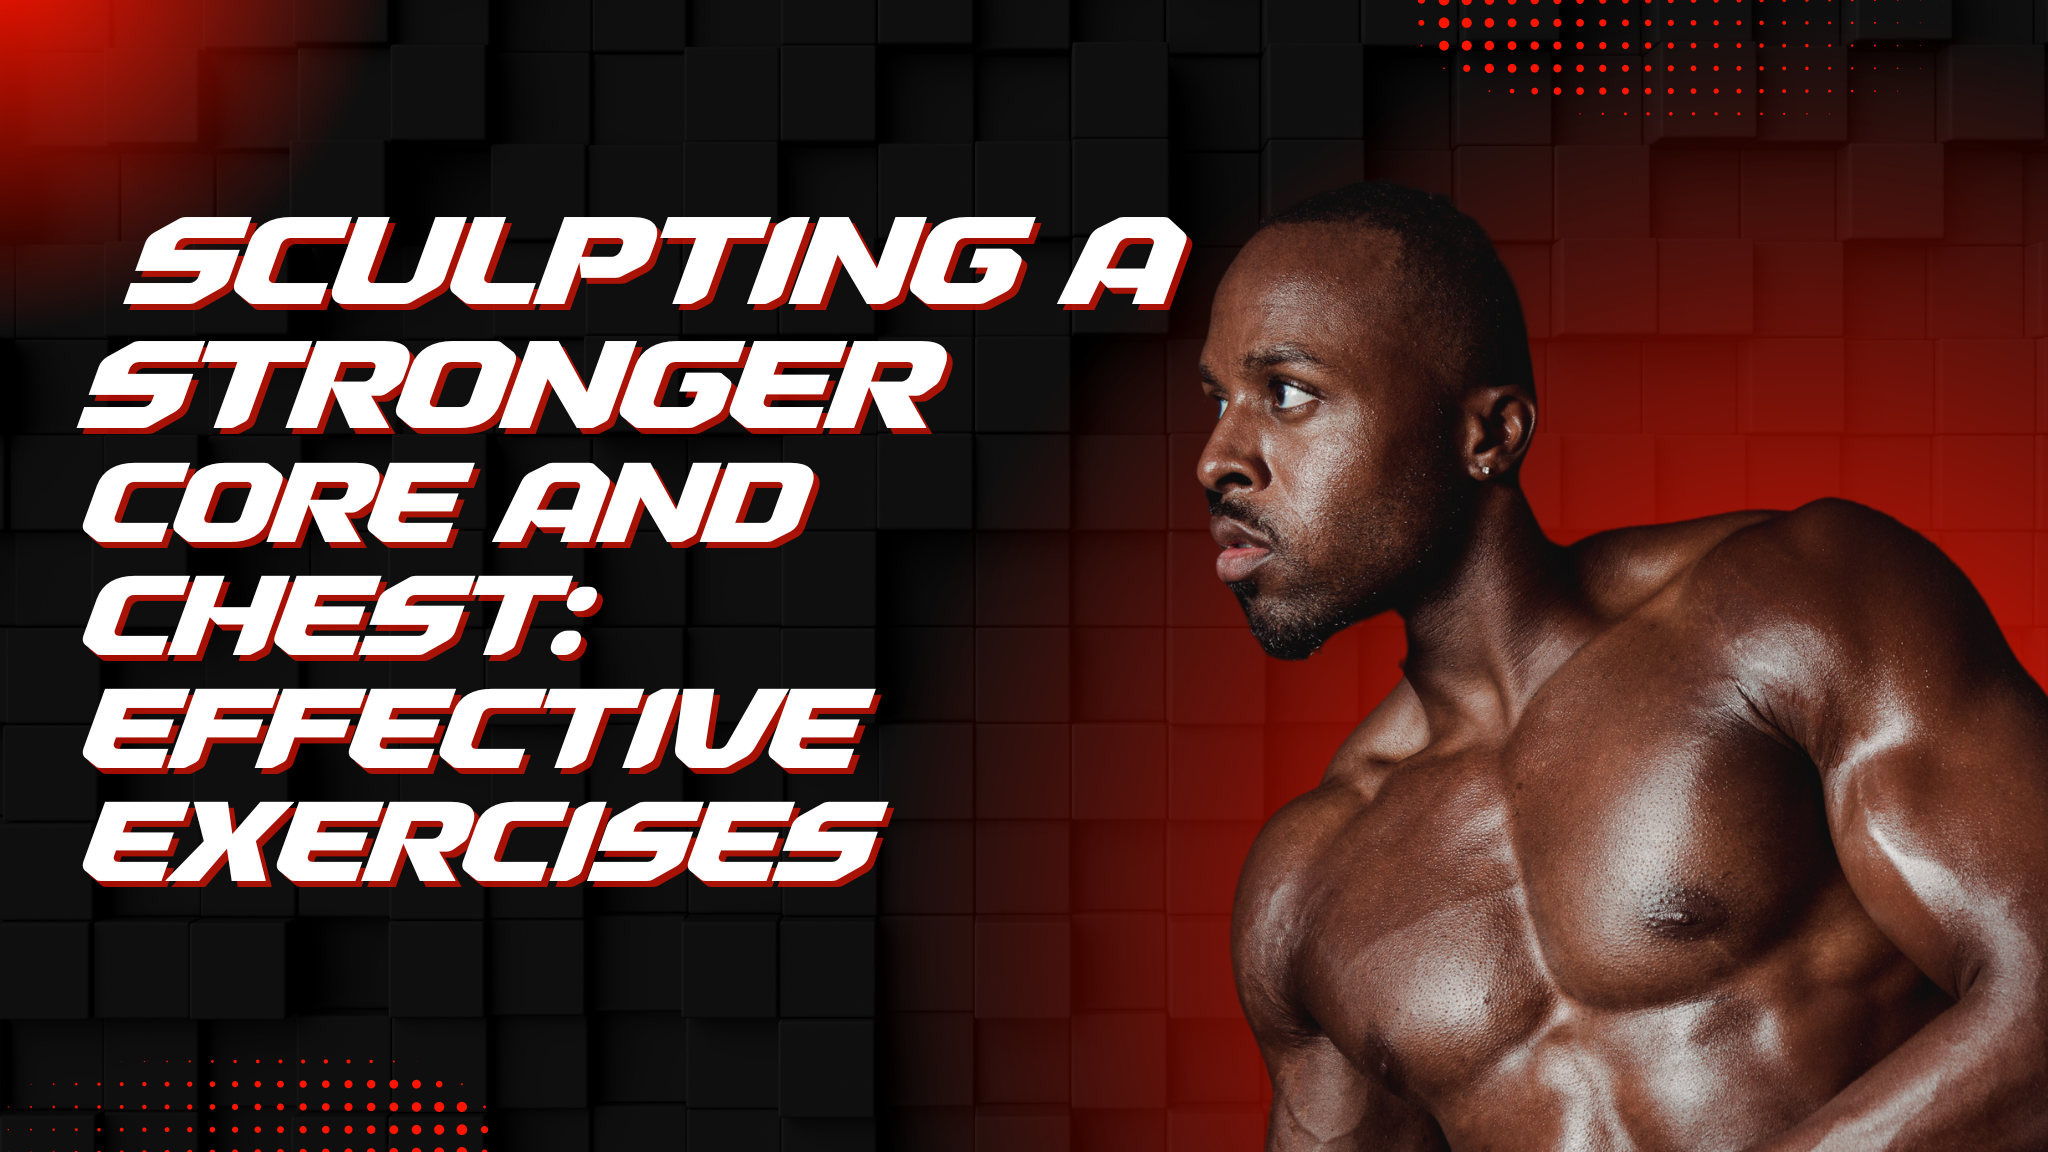 Sculpting a Stronger Core and Chest: Effective Exercises